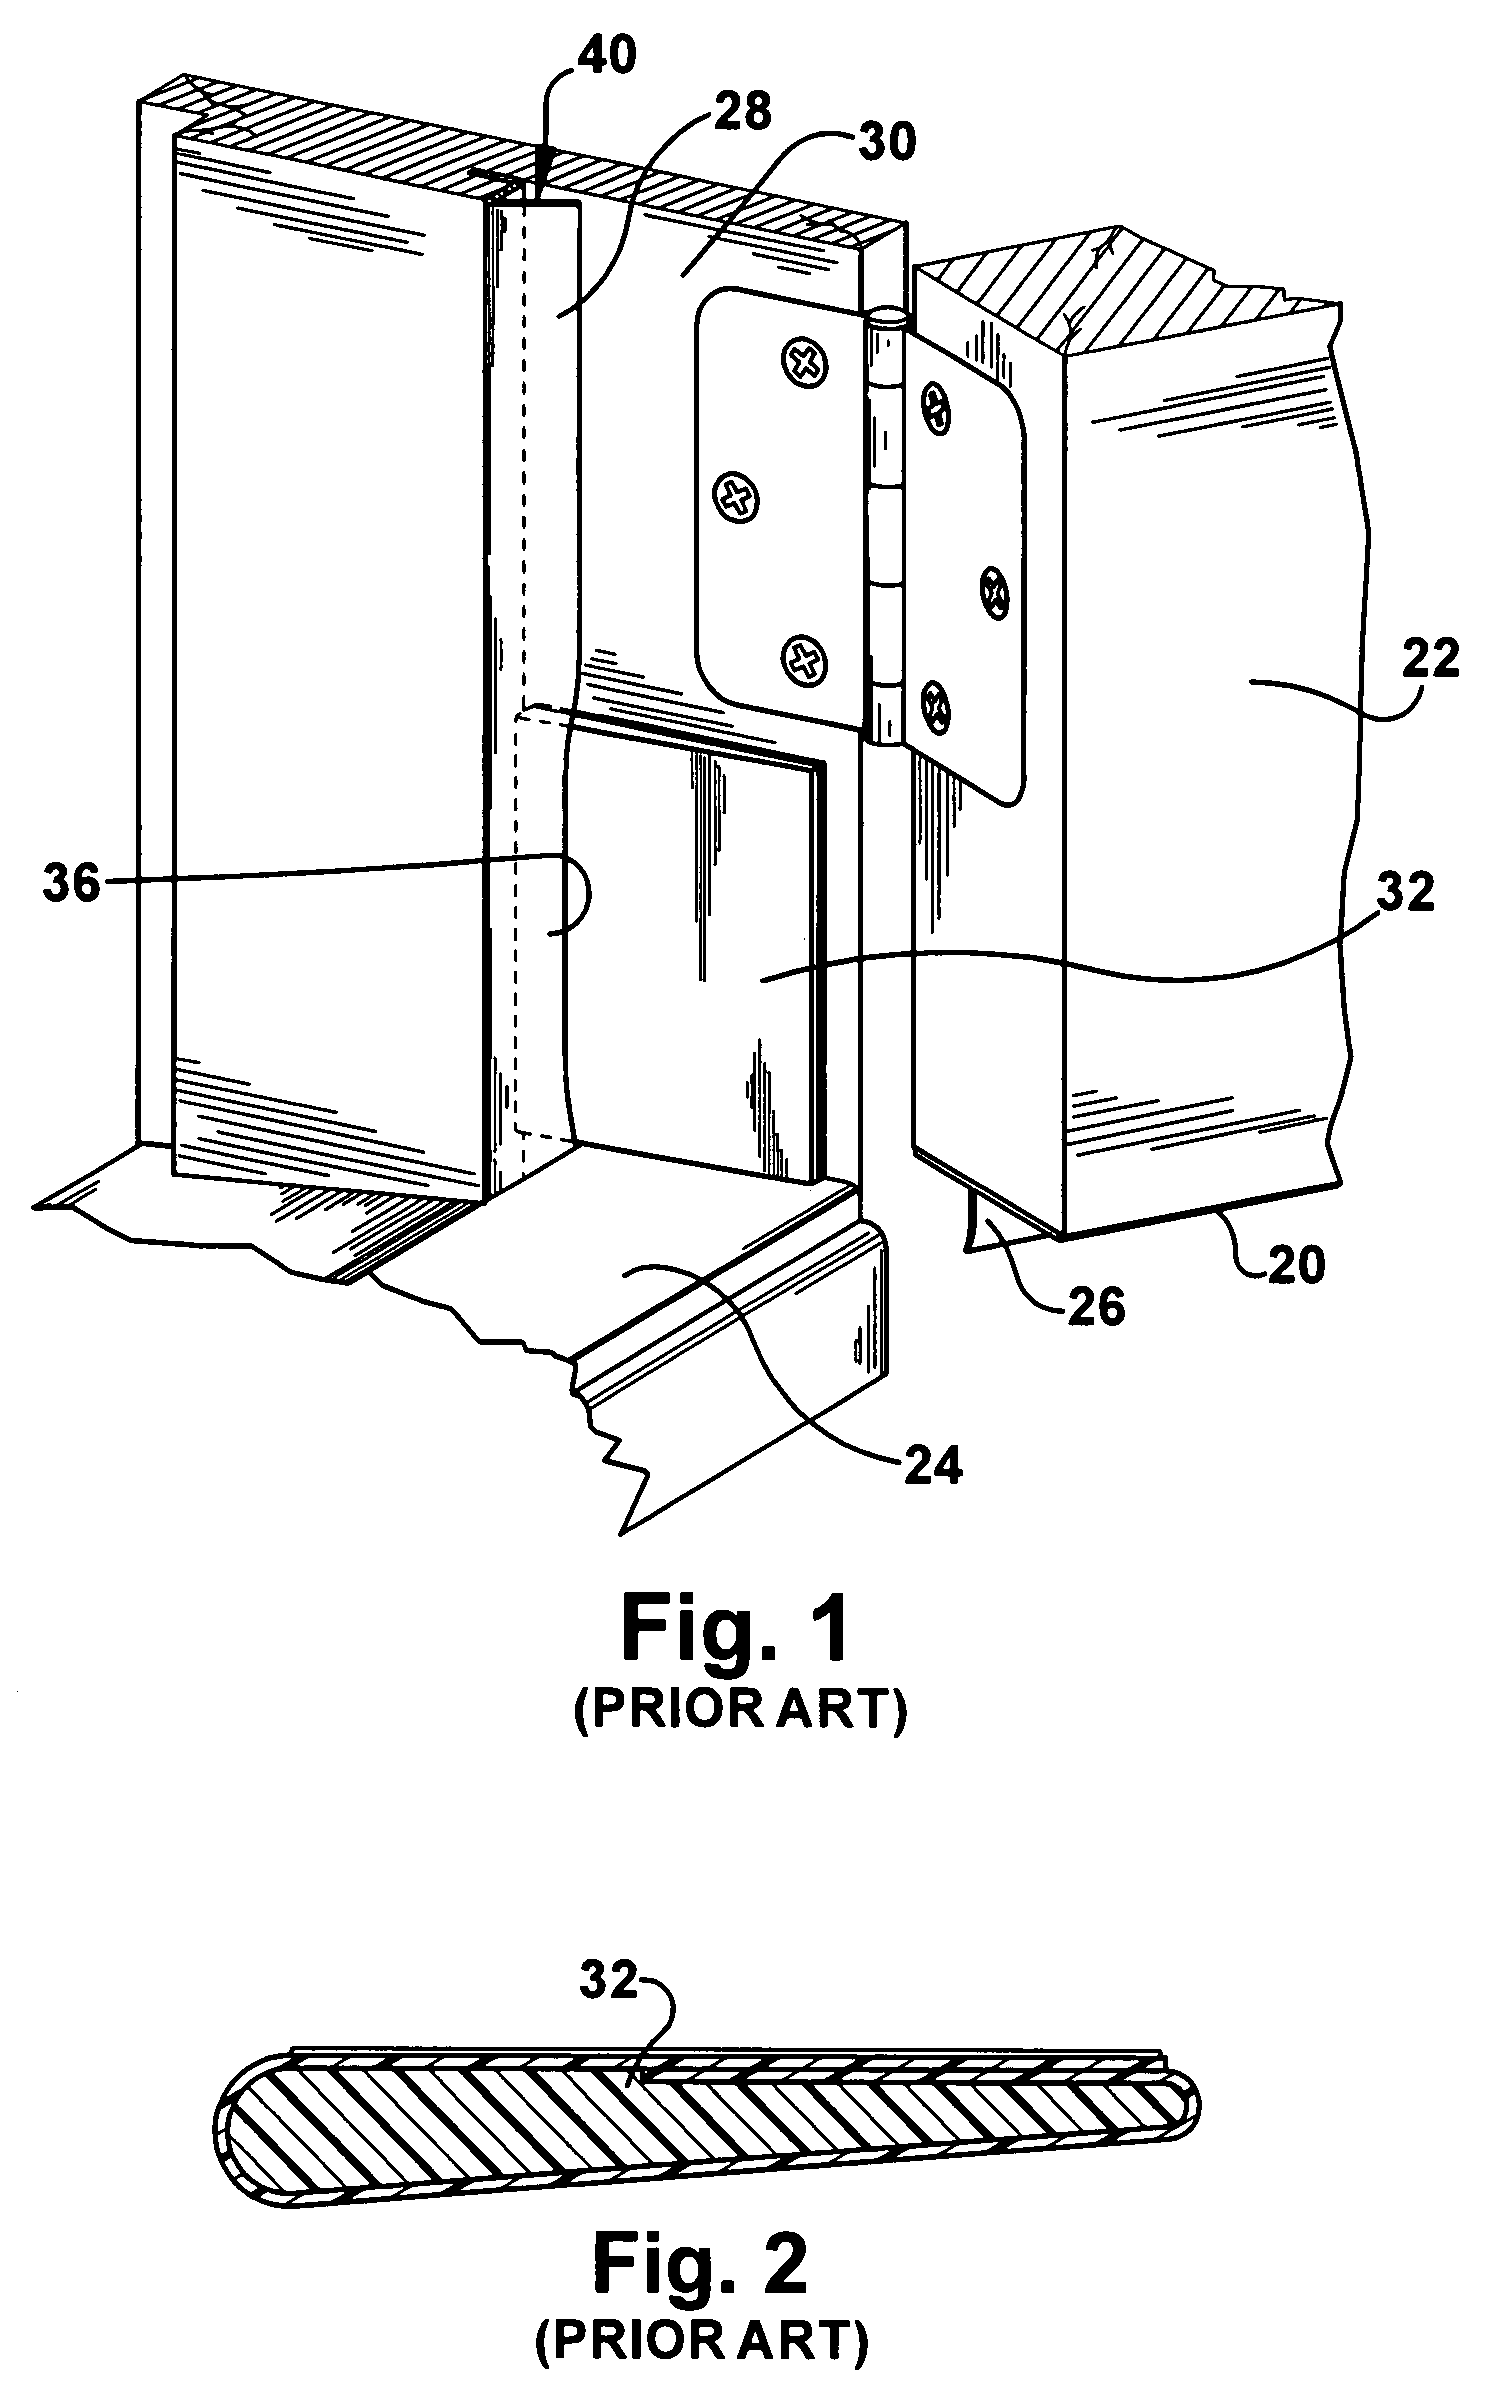 Entry system with water infiltration barrier